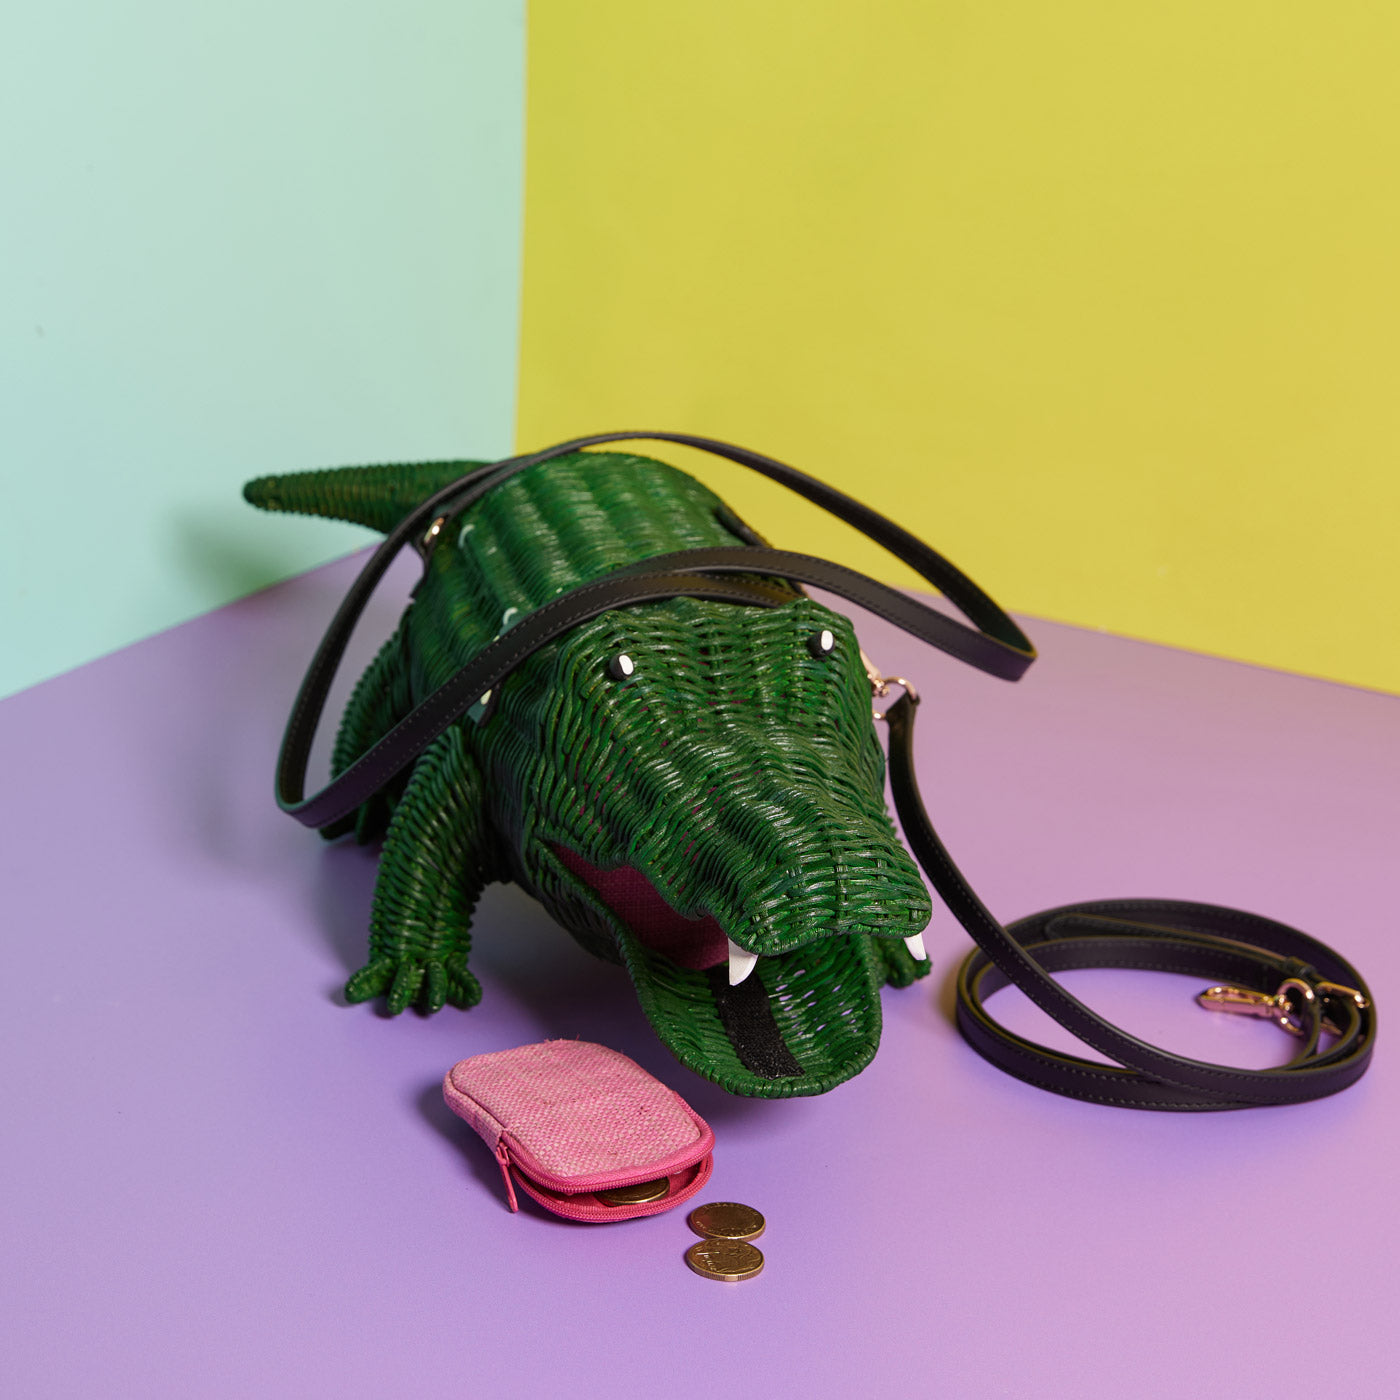 Wicker Darling Crocogator the Crocodile Bag with pink coin purse on a colourful background